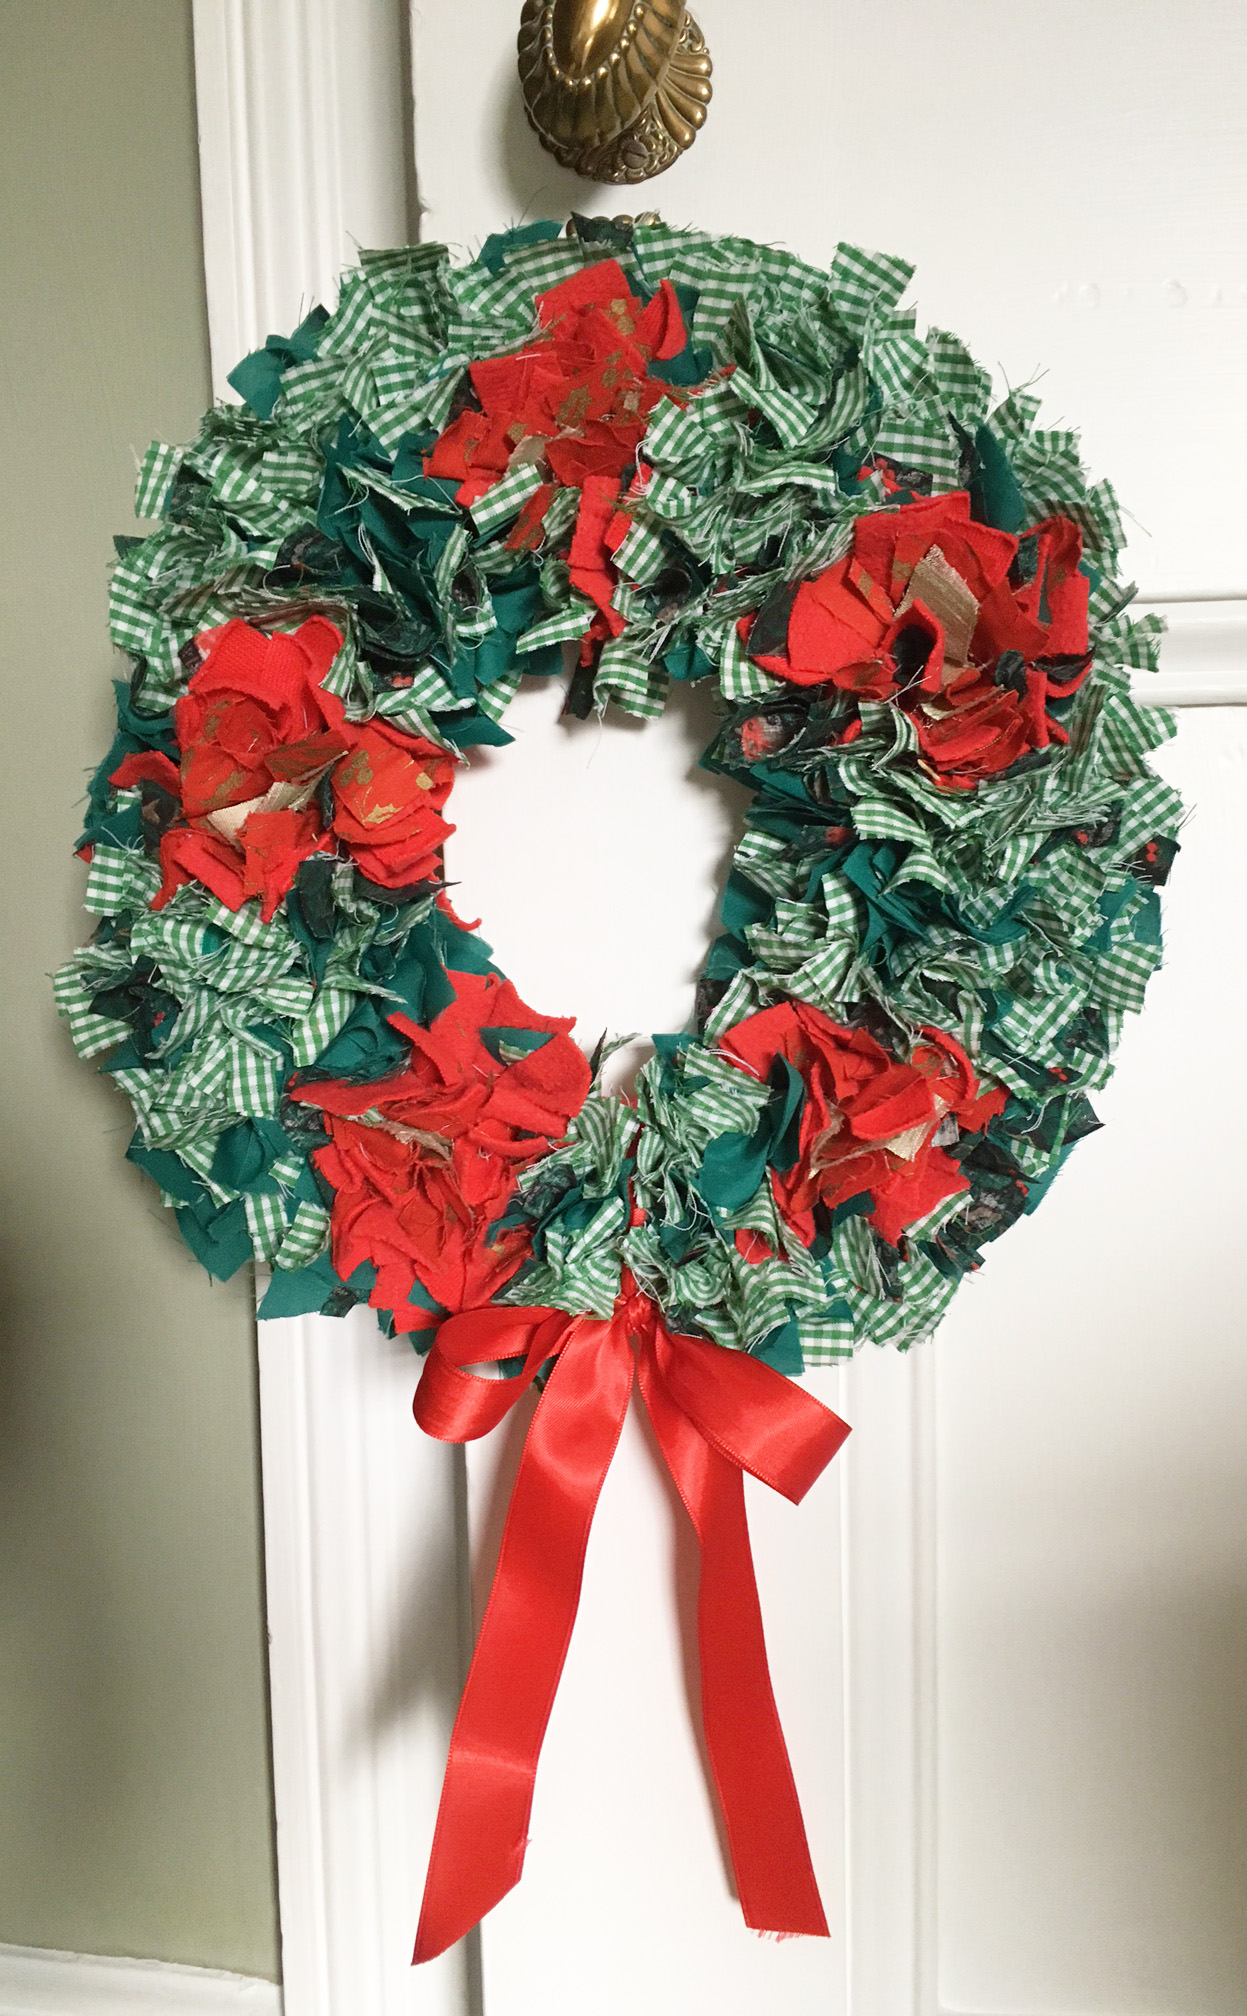 Handmade Green gingham and Red Rag Rug Christmas Wreath with Bow